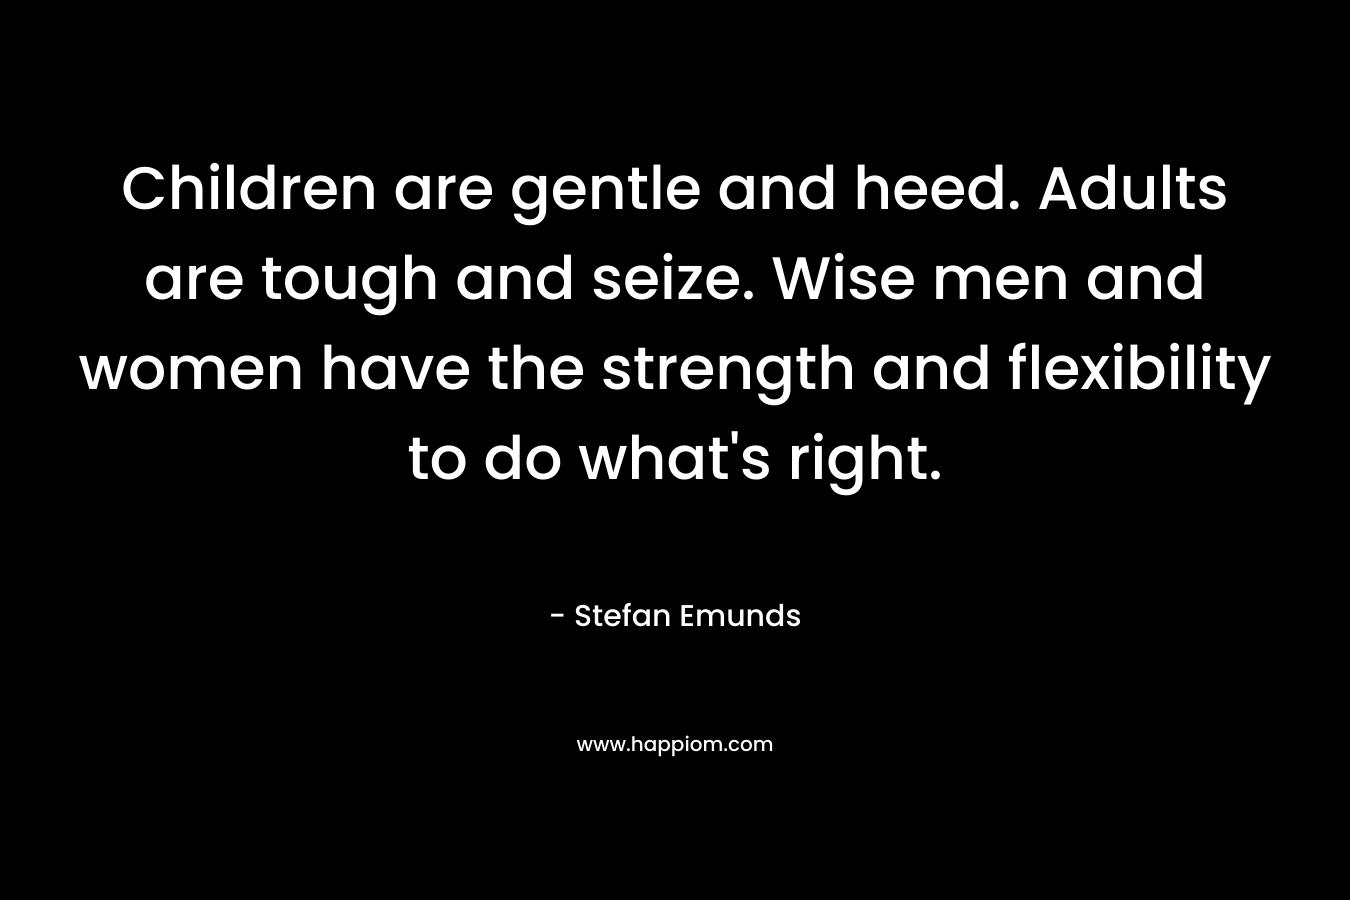 Children are gentle and heed. Adults are tough and seize. Wise men and women have the strength and flexibility to do what’s right. – Stefan Emunds